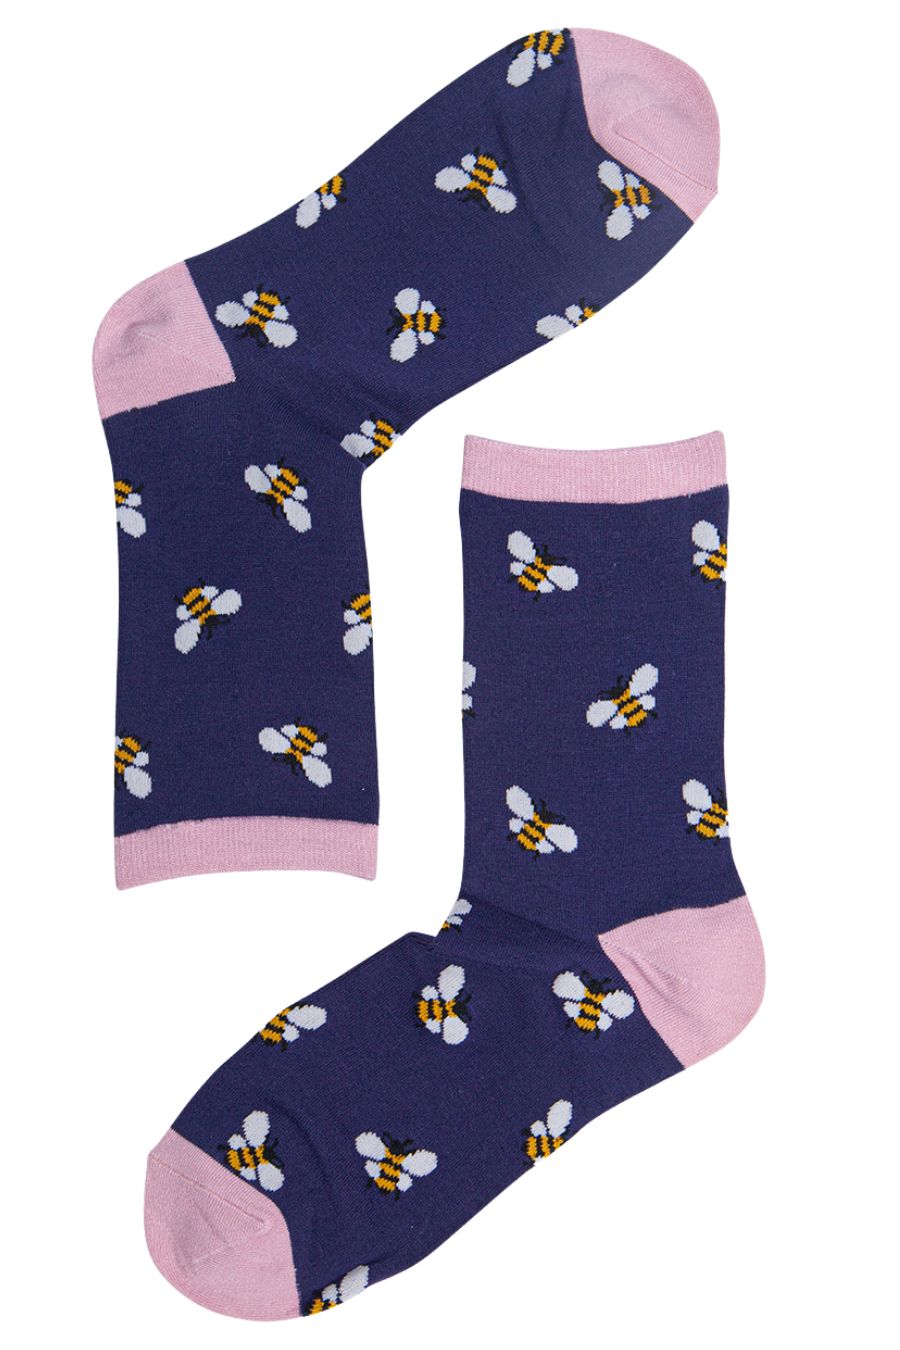 navy blue and pink bamboo socks with bumblebees